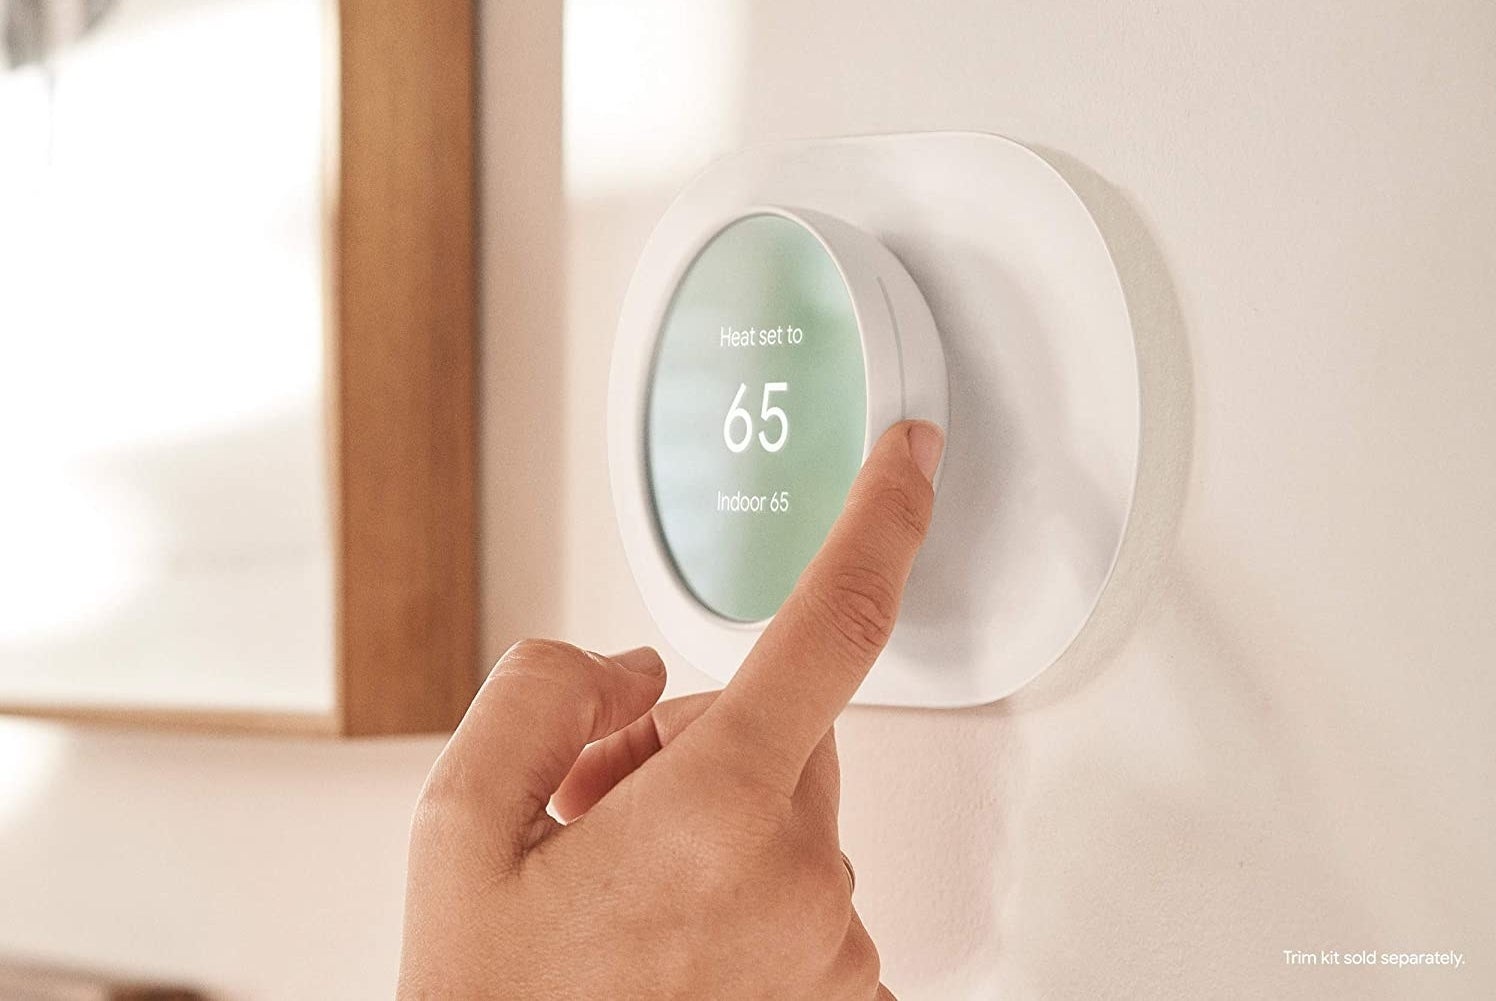 Model adjusting round white thermostat with screen display attached to a wall